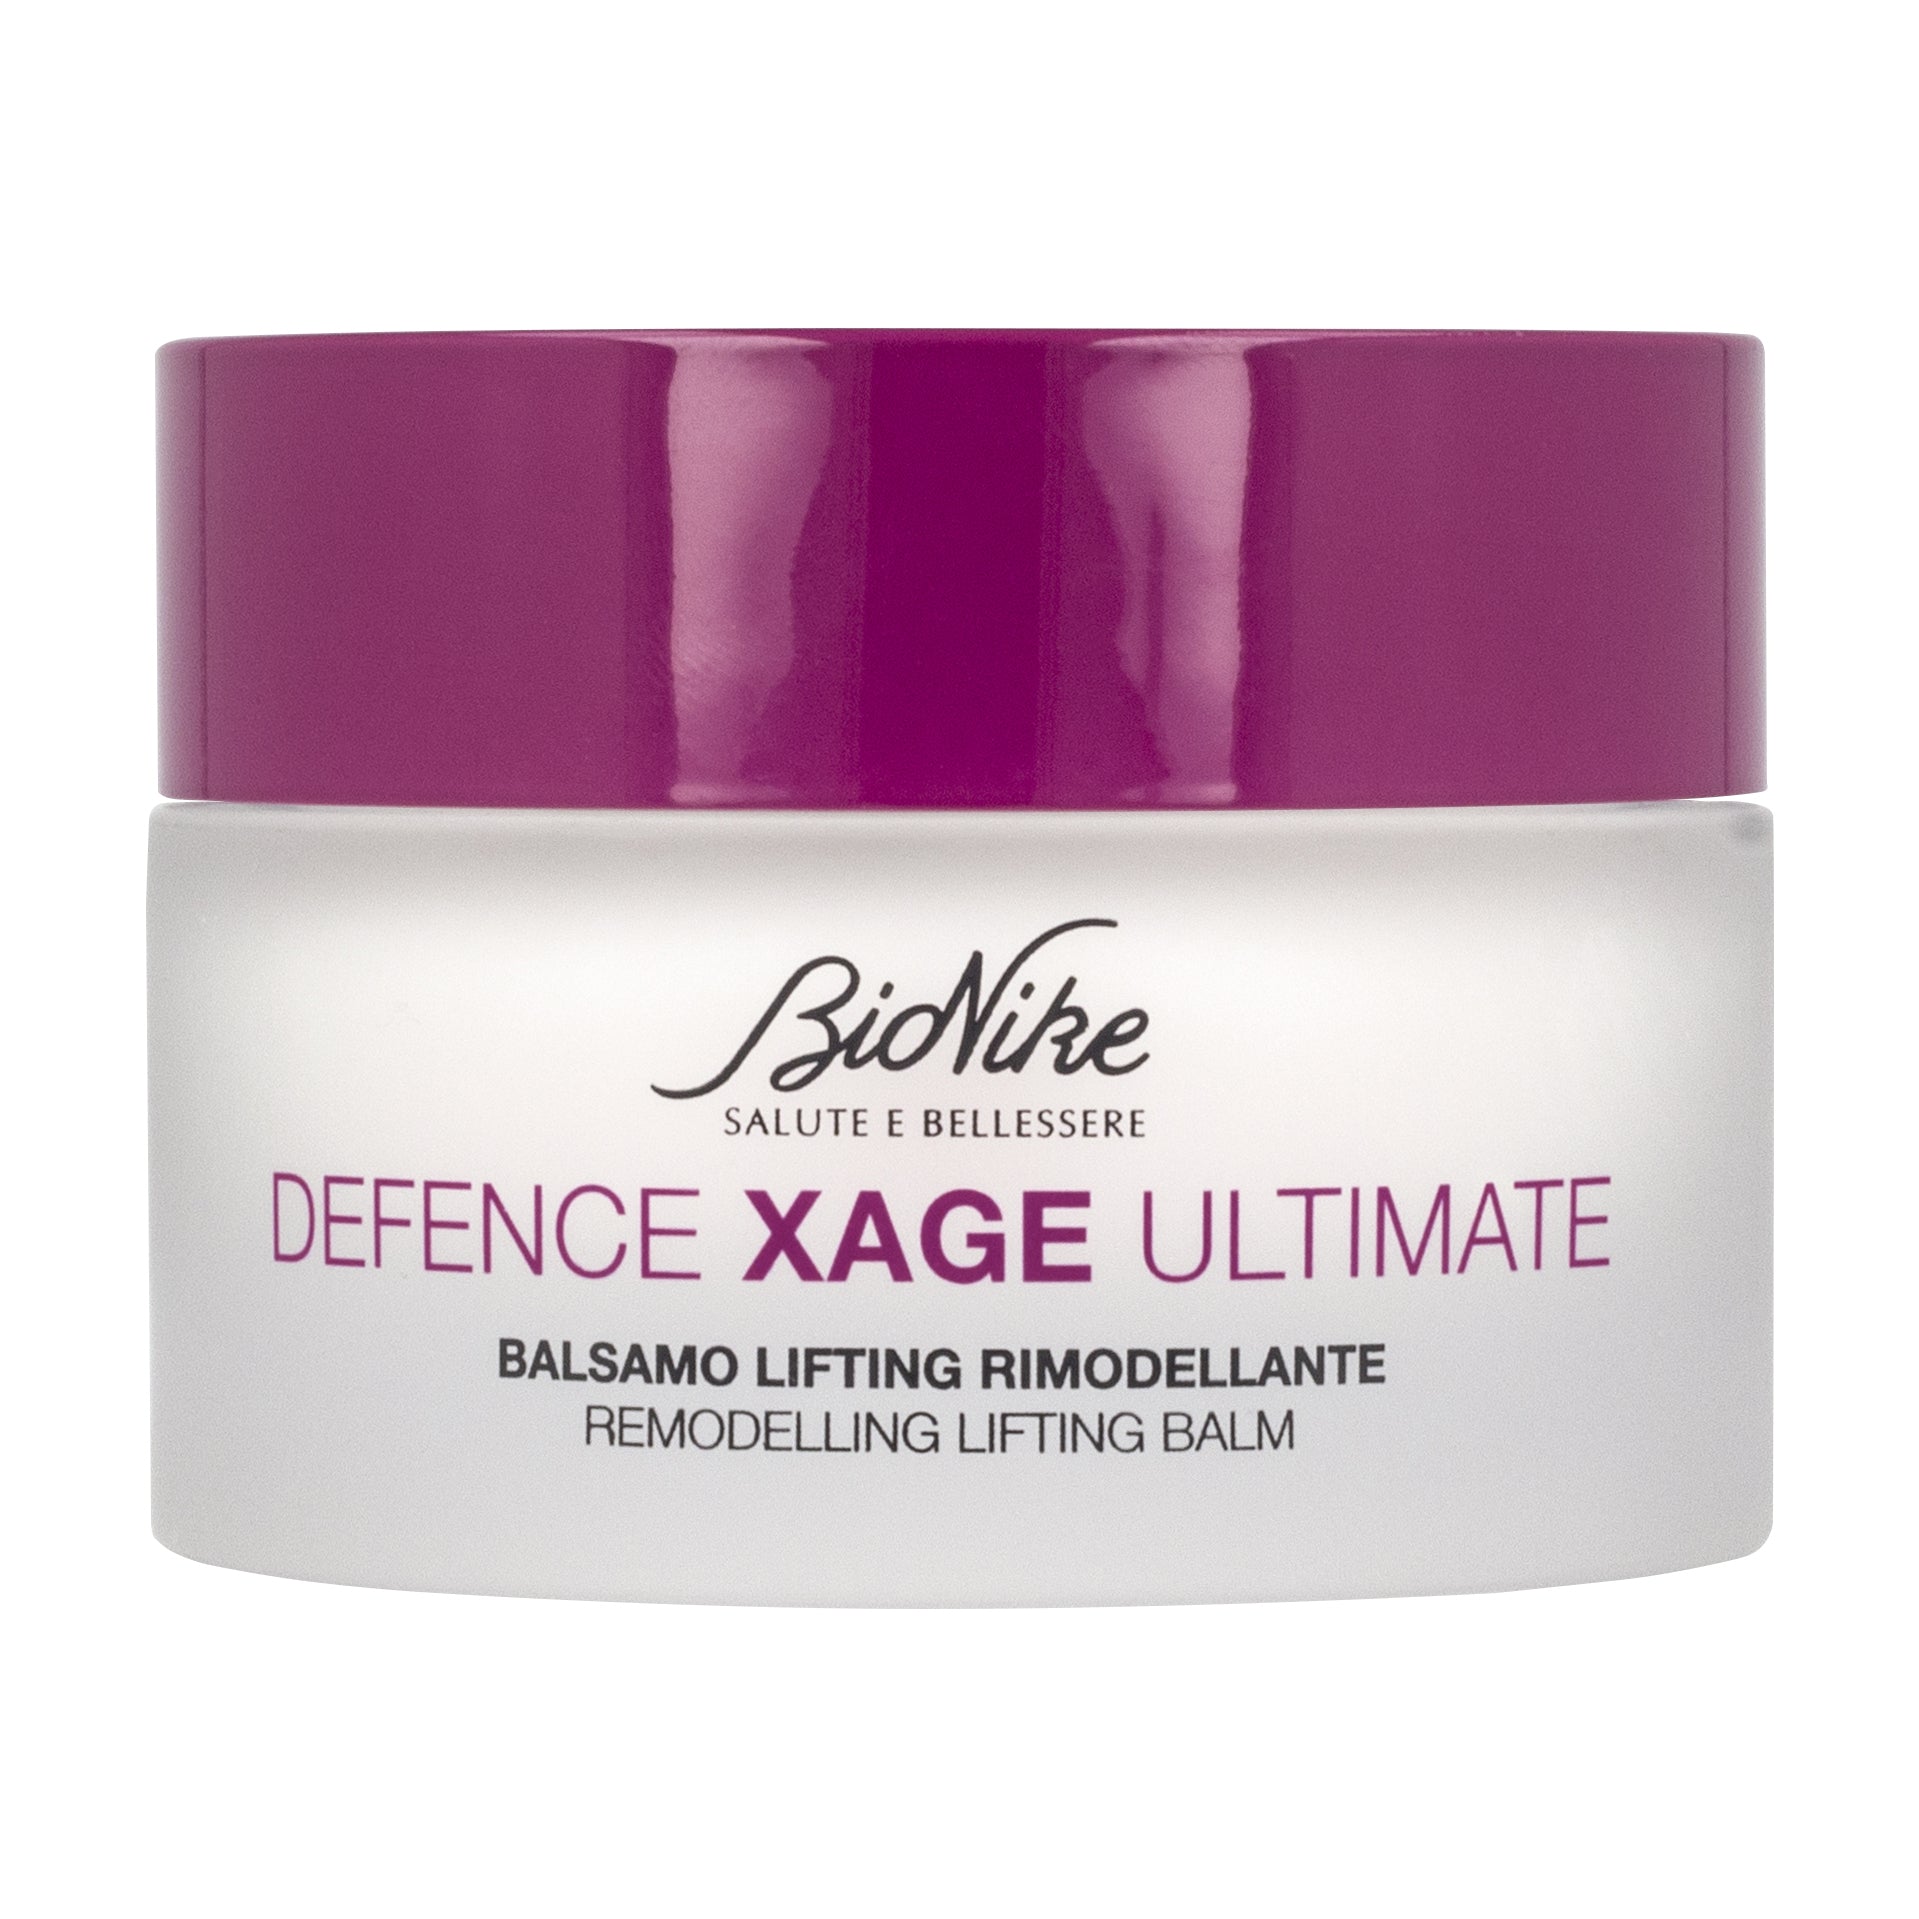 Defence Xage Ultimate Rich Balsamo